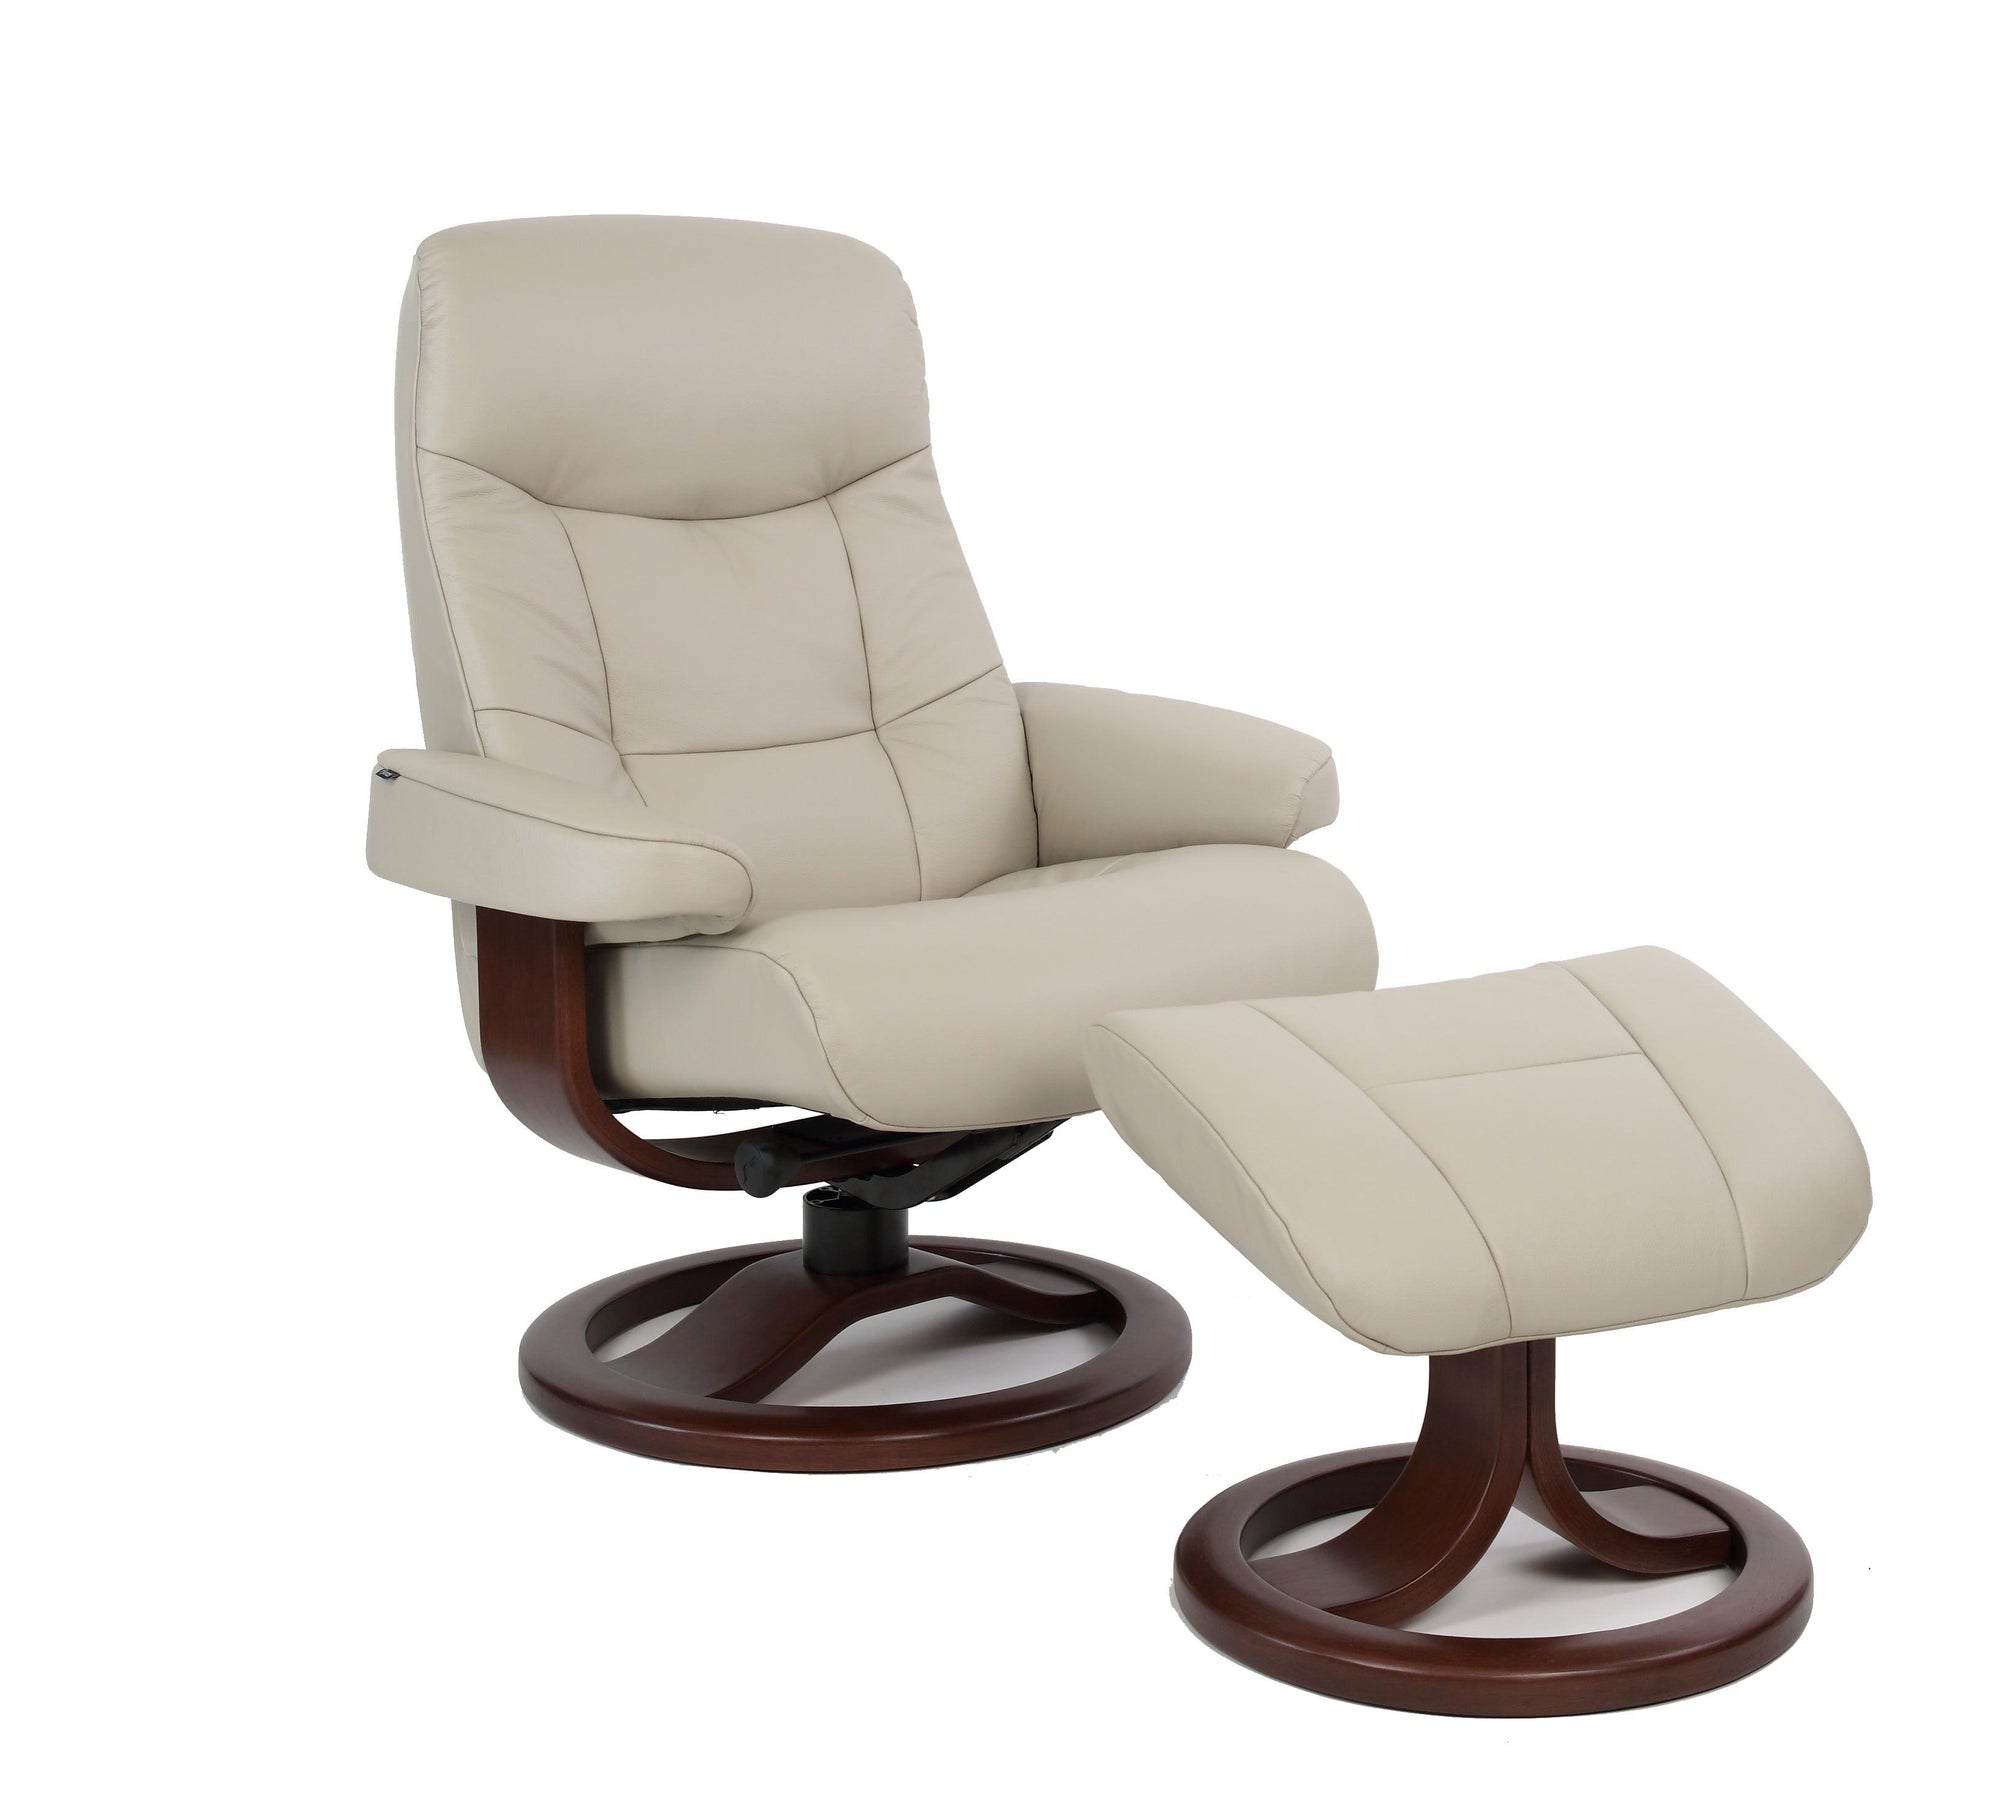 Muldal R Leather Reclining Chair in Havana - Euro Living Furniture